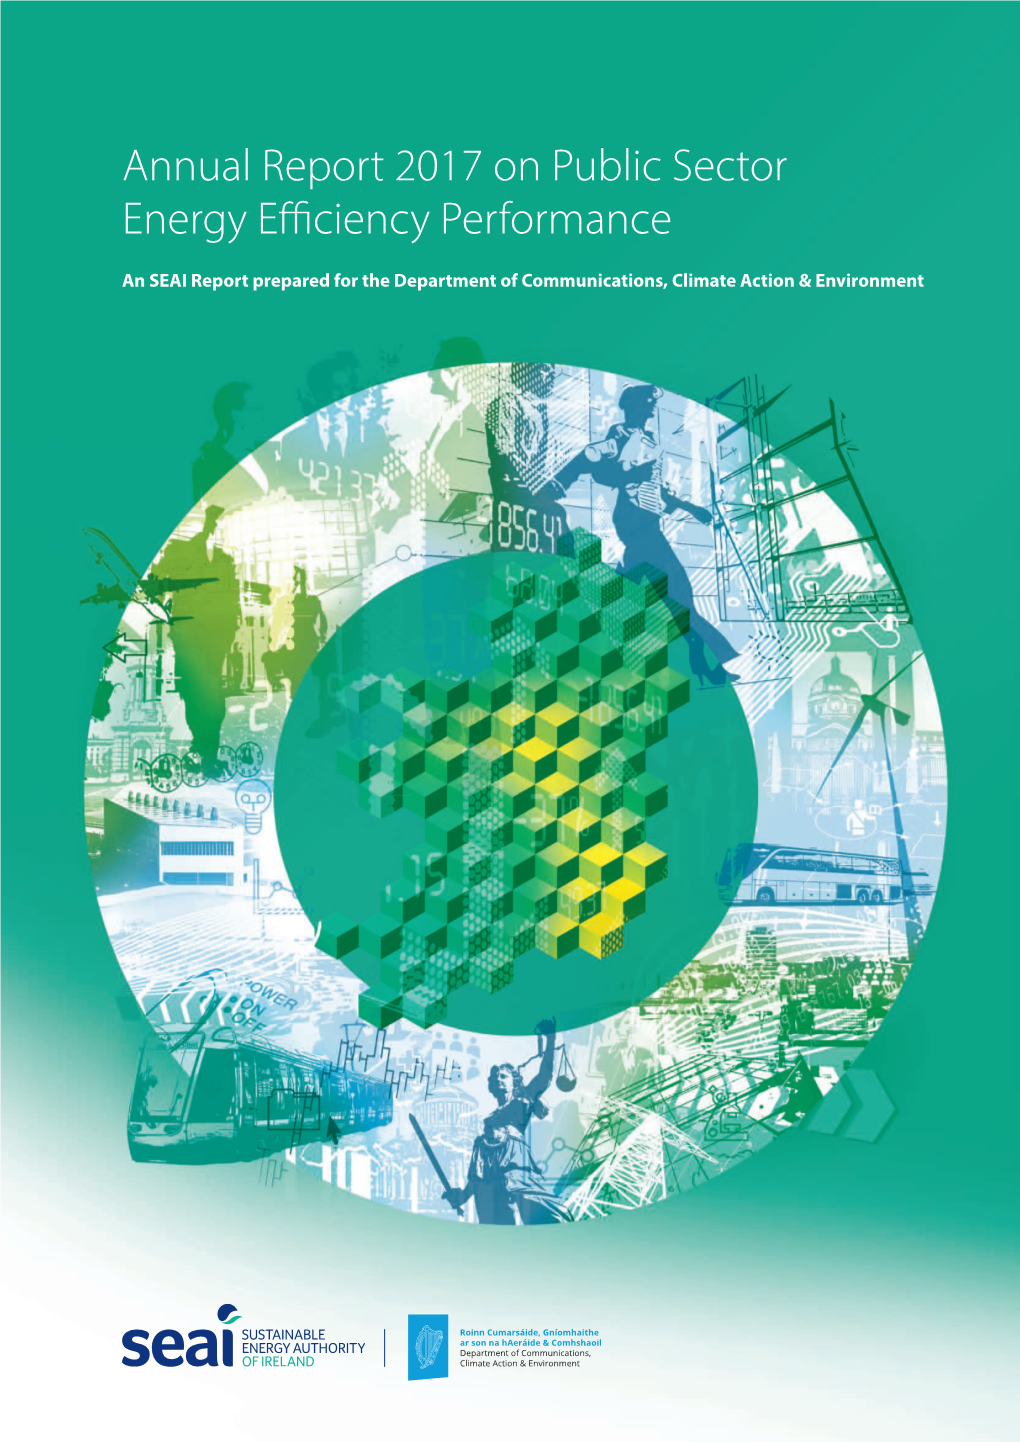 Annual Report 2017 on Public Sector Energy Efficiency Performance